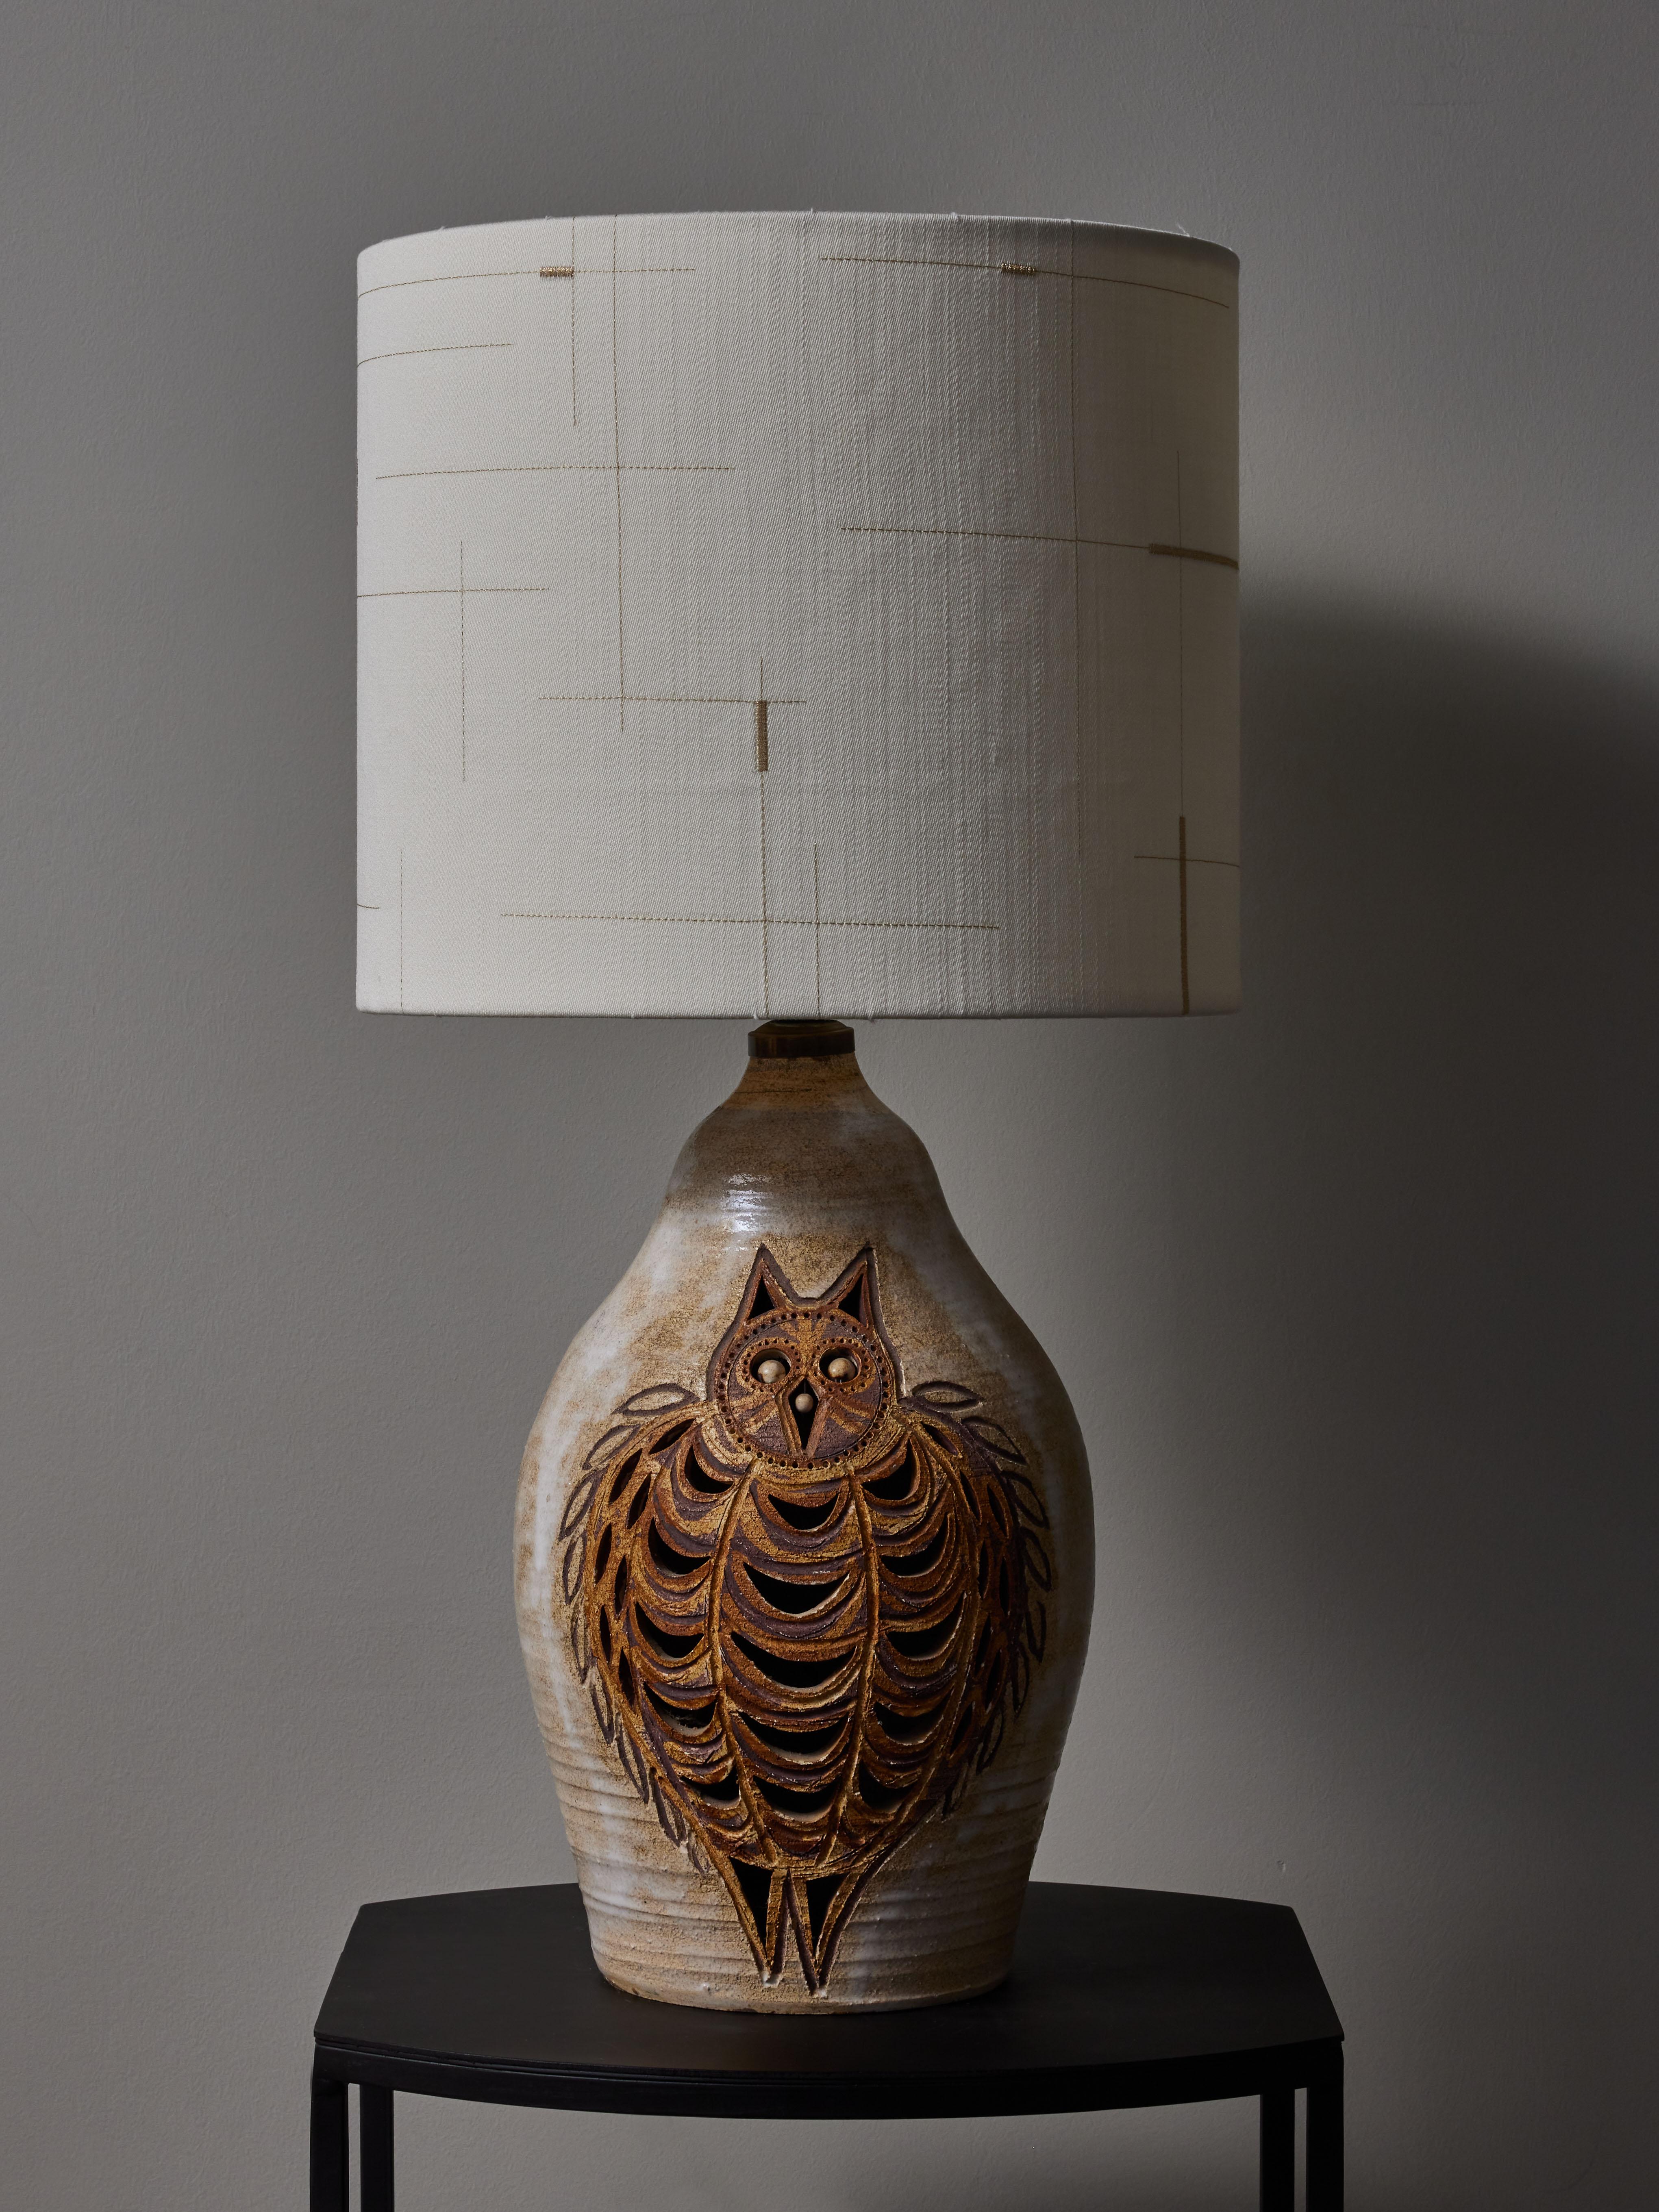 Ceramic table lamps made by Georges Pelletier, Owl deco on the face. New Dedar Milano fabric lampshade.


Georges Pelletier
Born in 1938 in Brussels, Belgium, Georges Pelletier is a ceramist who lives and works in Cannes, France. His ceramics are